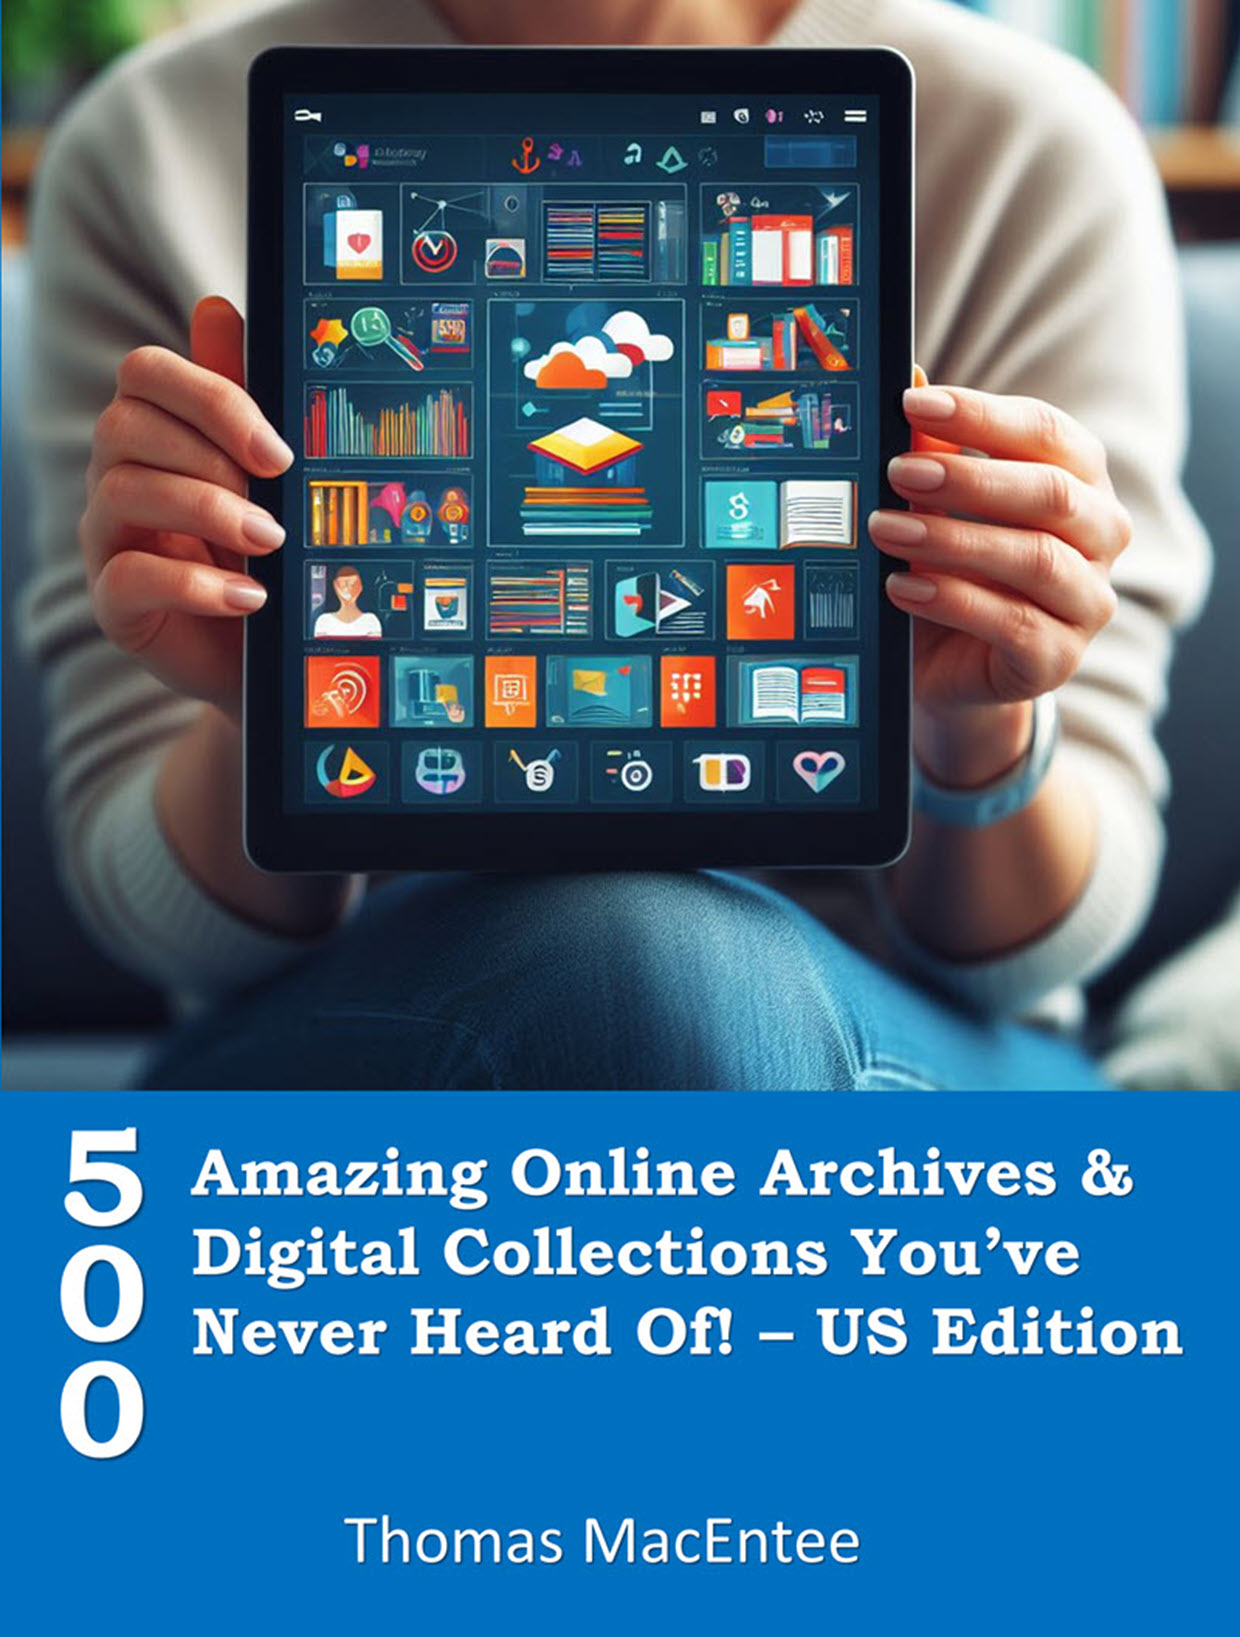 500 Amazing Online Archives and Digital Collections - US Edition now available in Kindle, PDF, and Paperback formats!